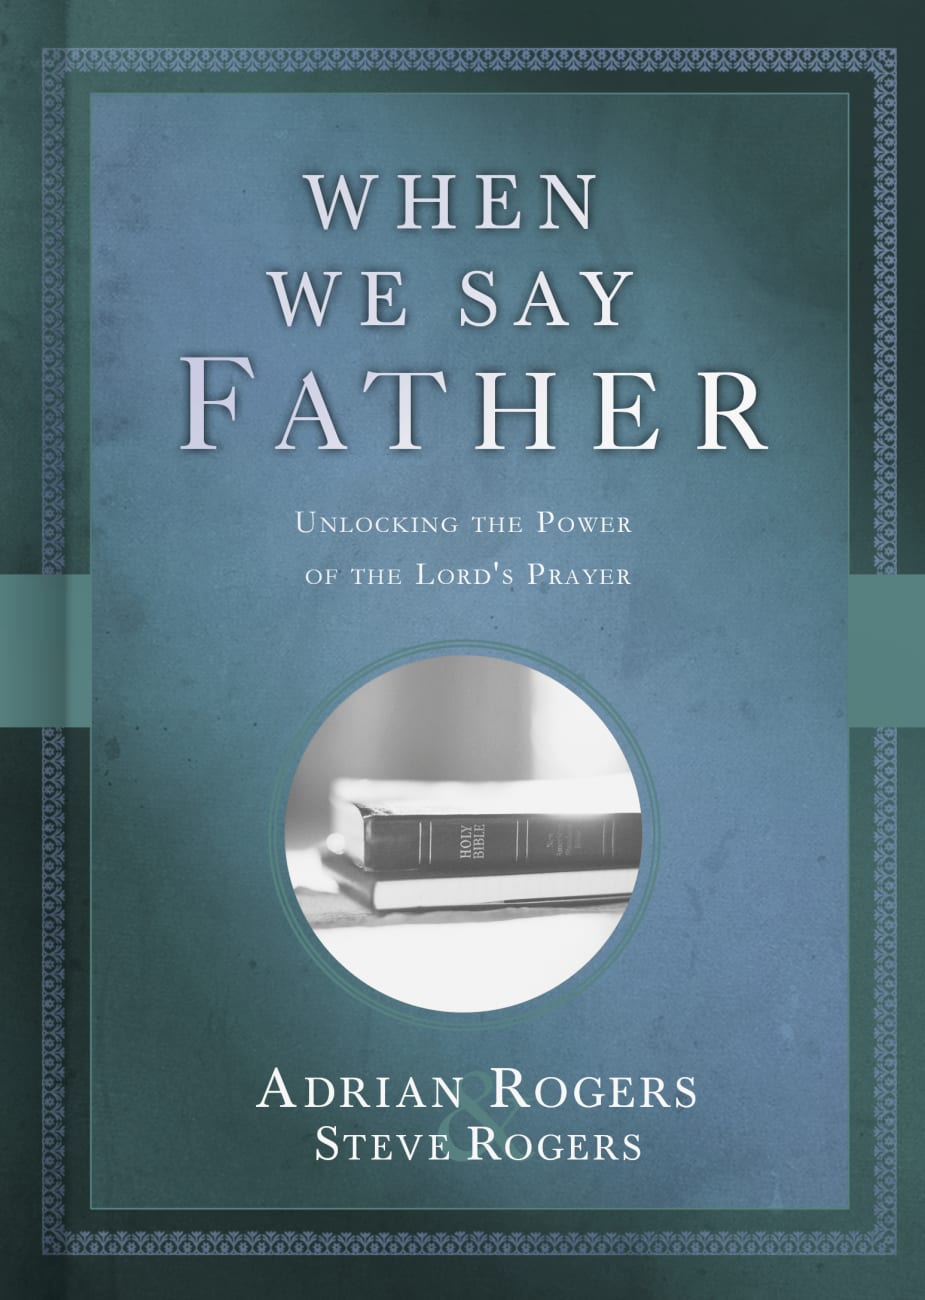 When We Say Father: Unlocking the Power of the Lord's Prayer Hardback